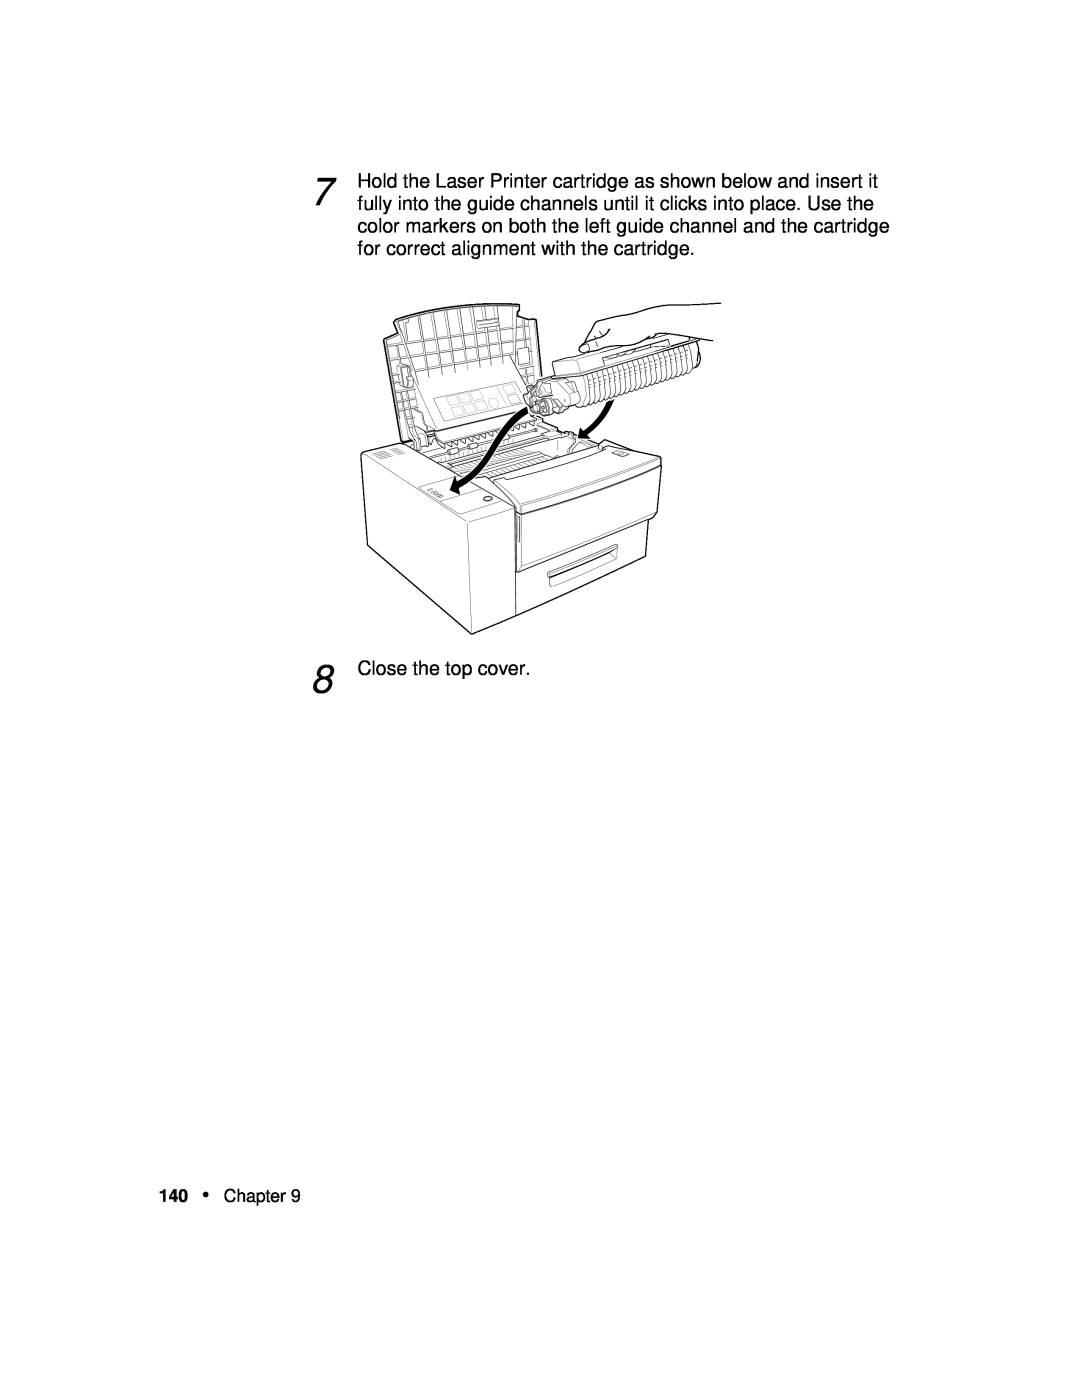 Xerox P12 manual Close the top cover, Hold the Laser Printer cartridge as shown below and insert it, Chapter 